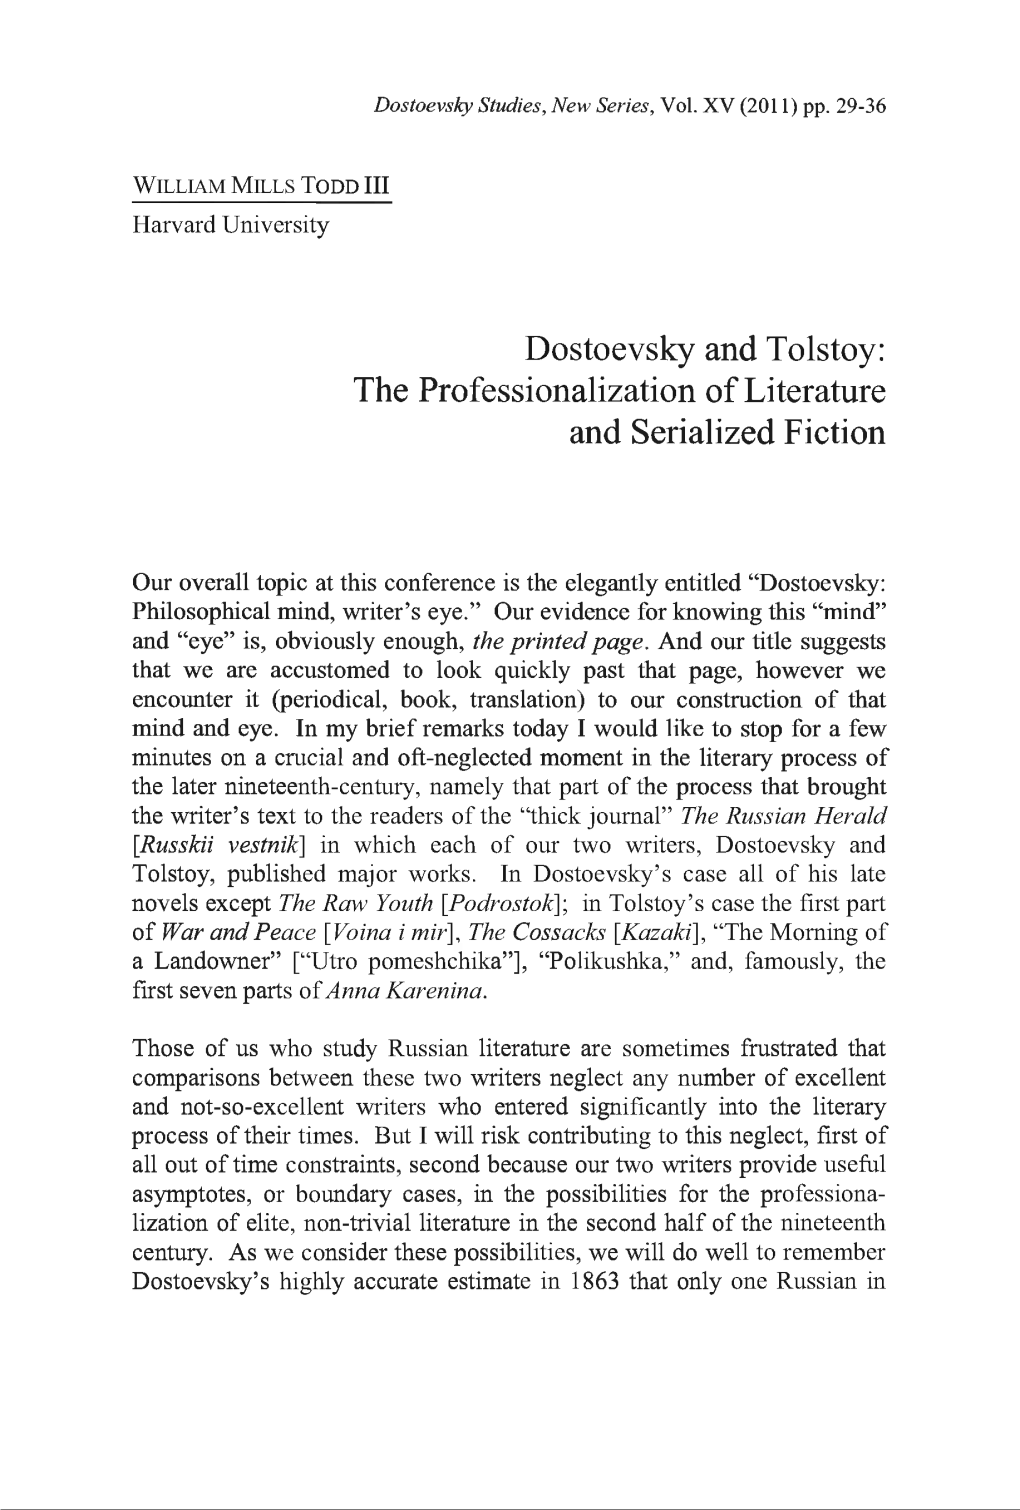 Dostoevsky and Tolstoy: the Professionalization of Literature and Serialized Fiction